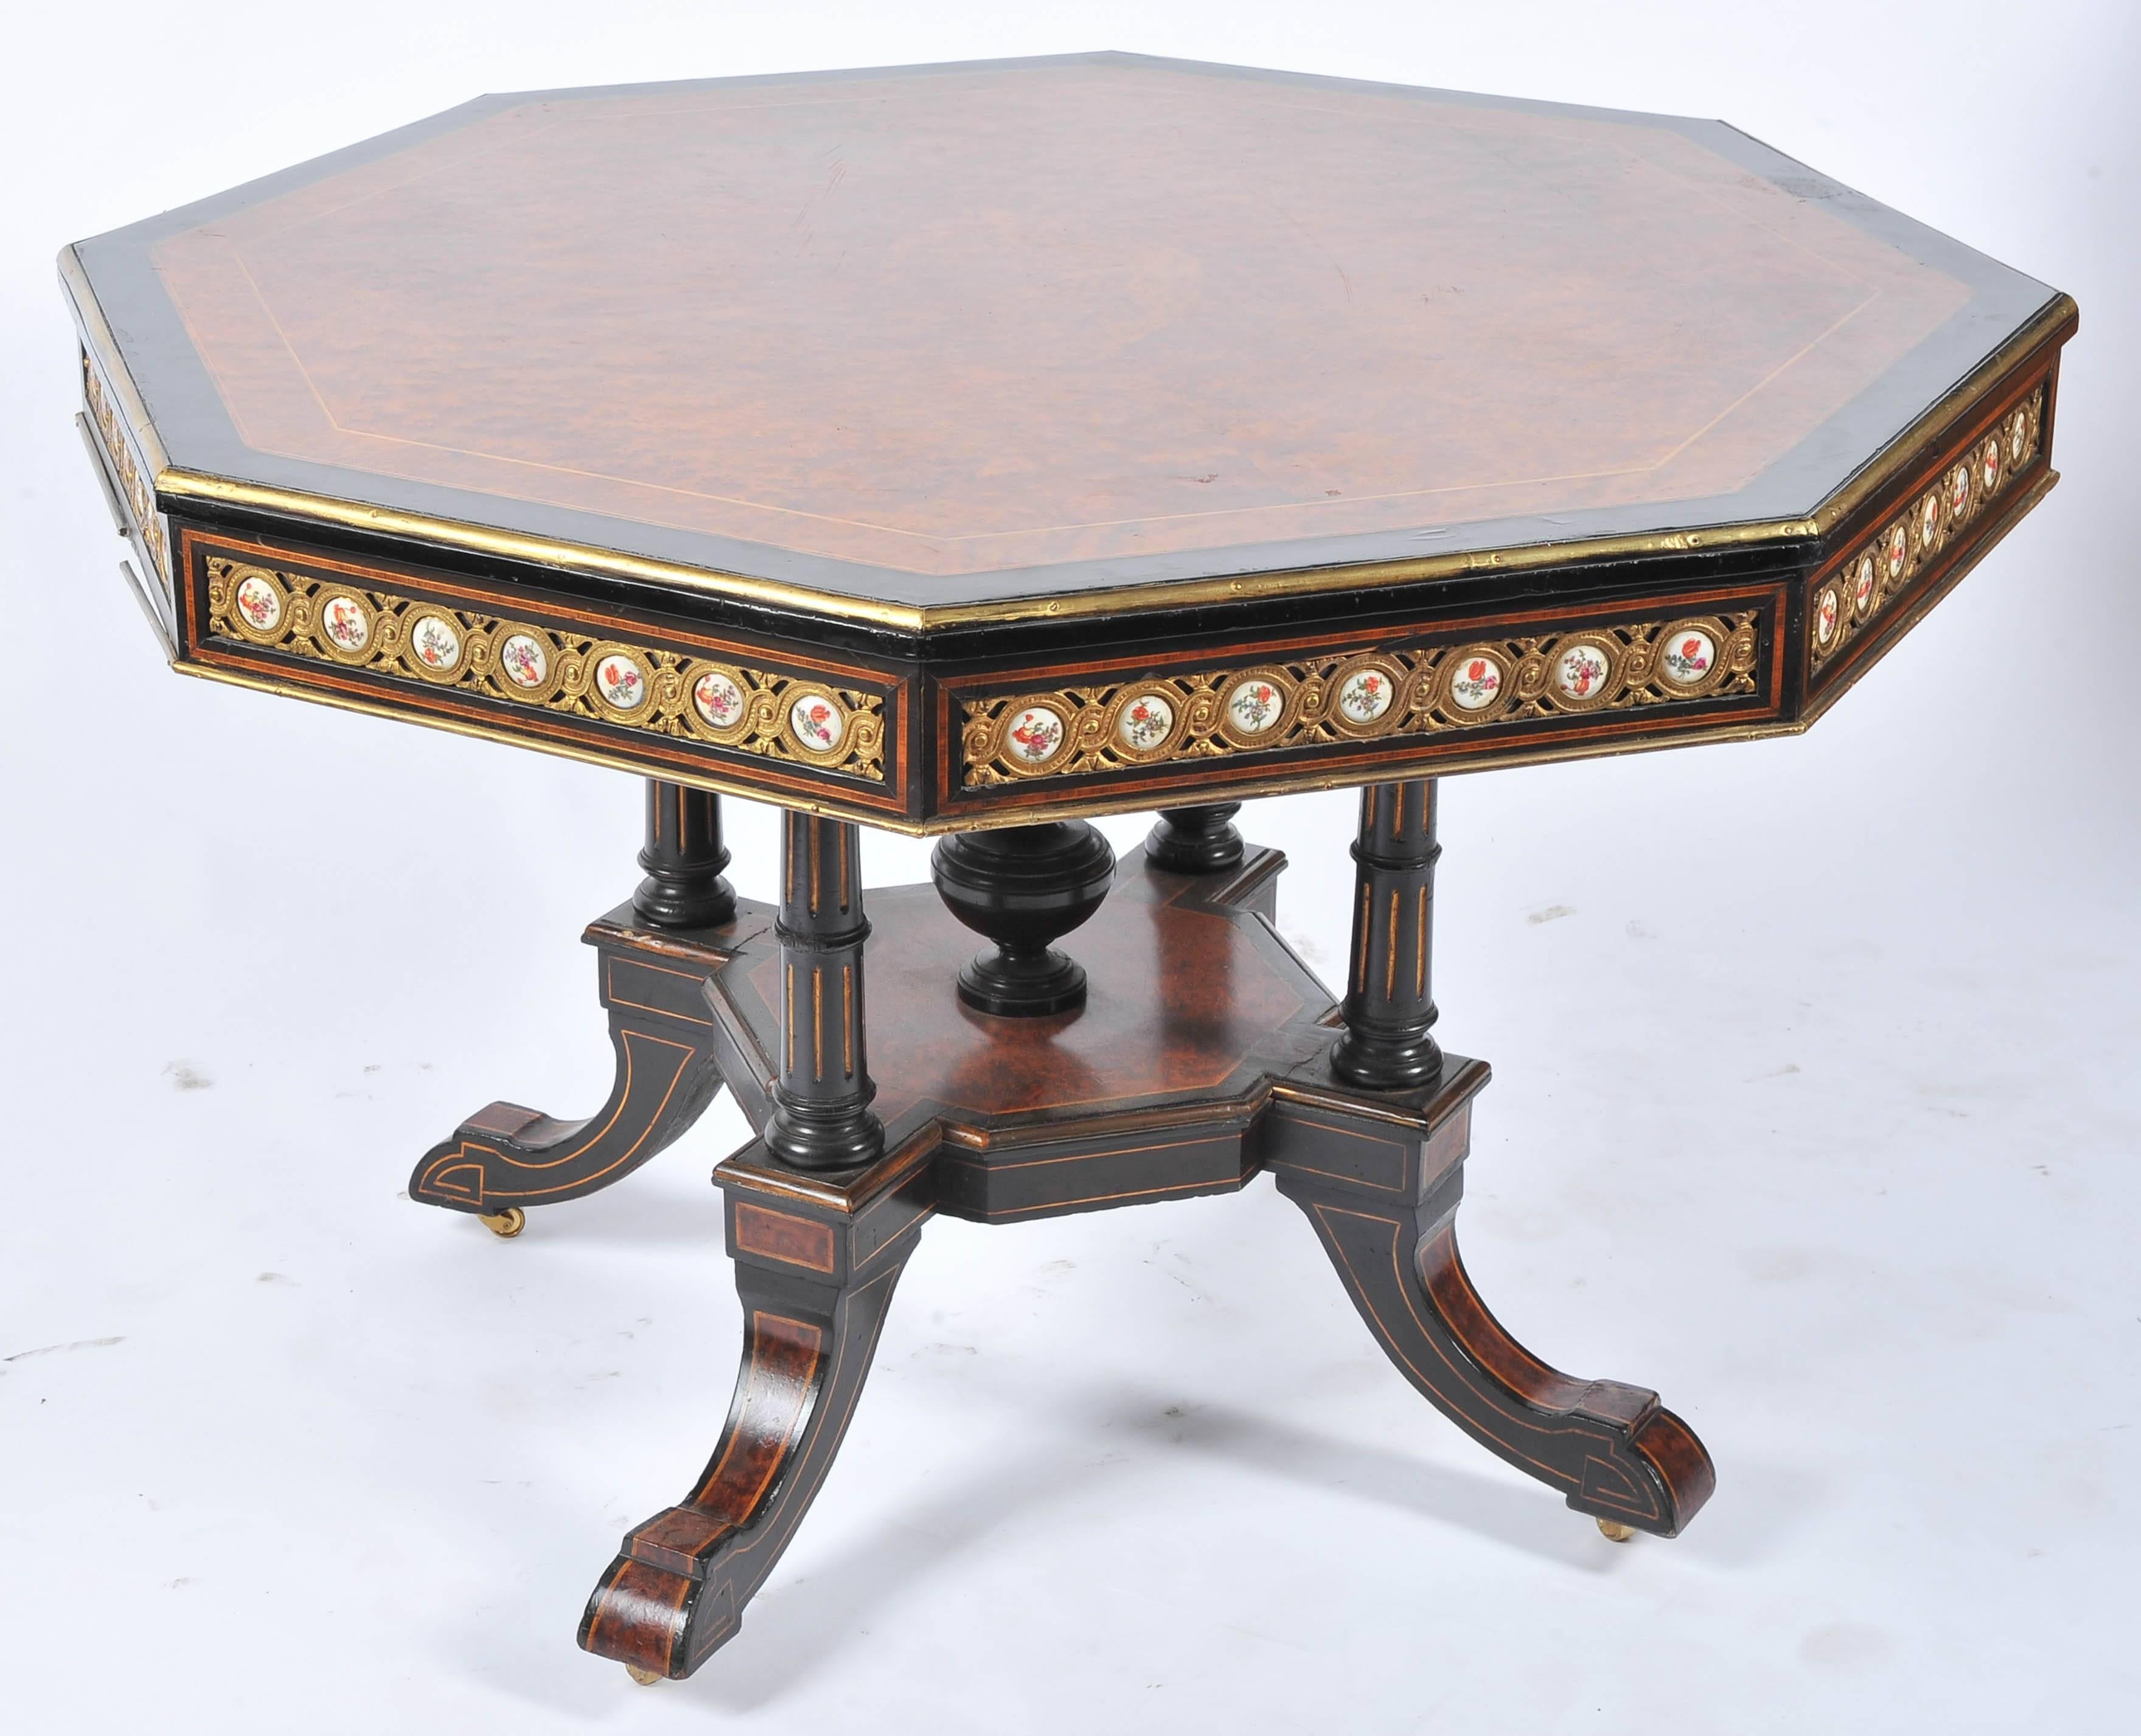 A good quality 19th century English Amboyna and ebony centre table, having French 'Sevres' porcelain plaques inset around the frieze, four turned supports, a platform with central urn and four out swept legs again with inlaid Amboyna veneer.